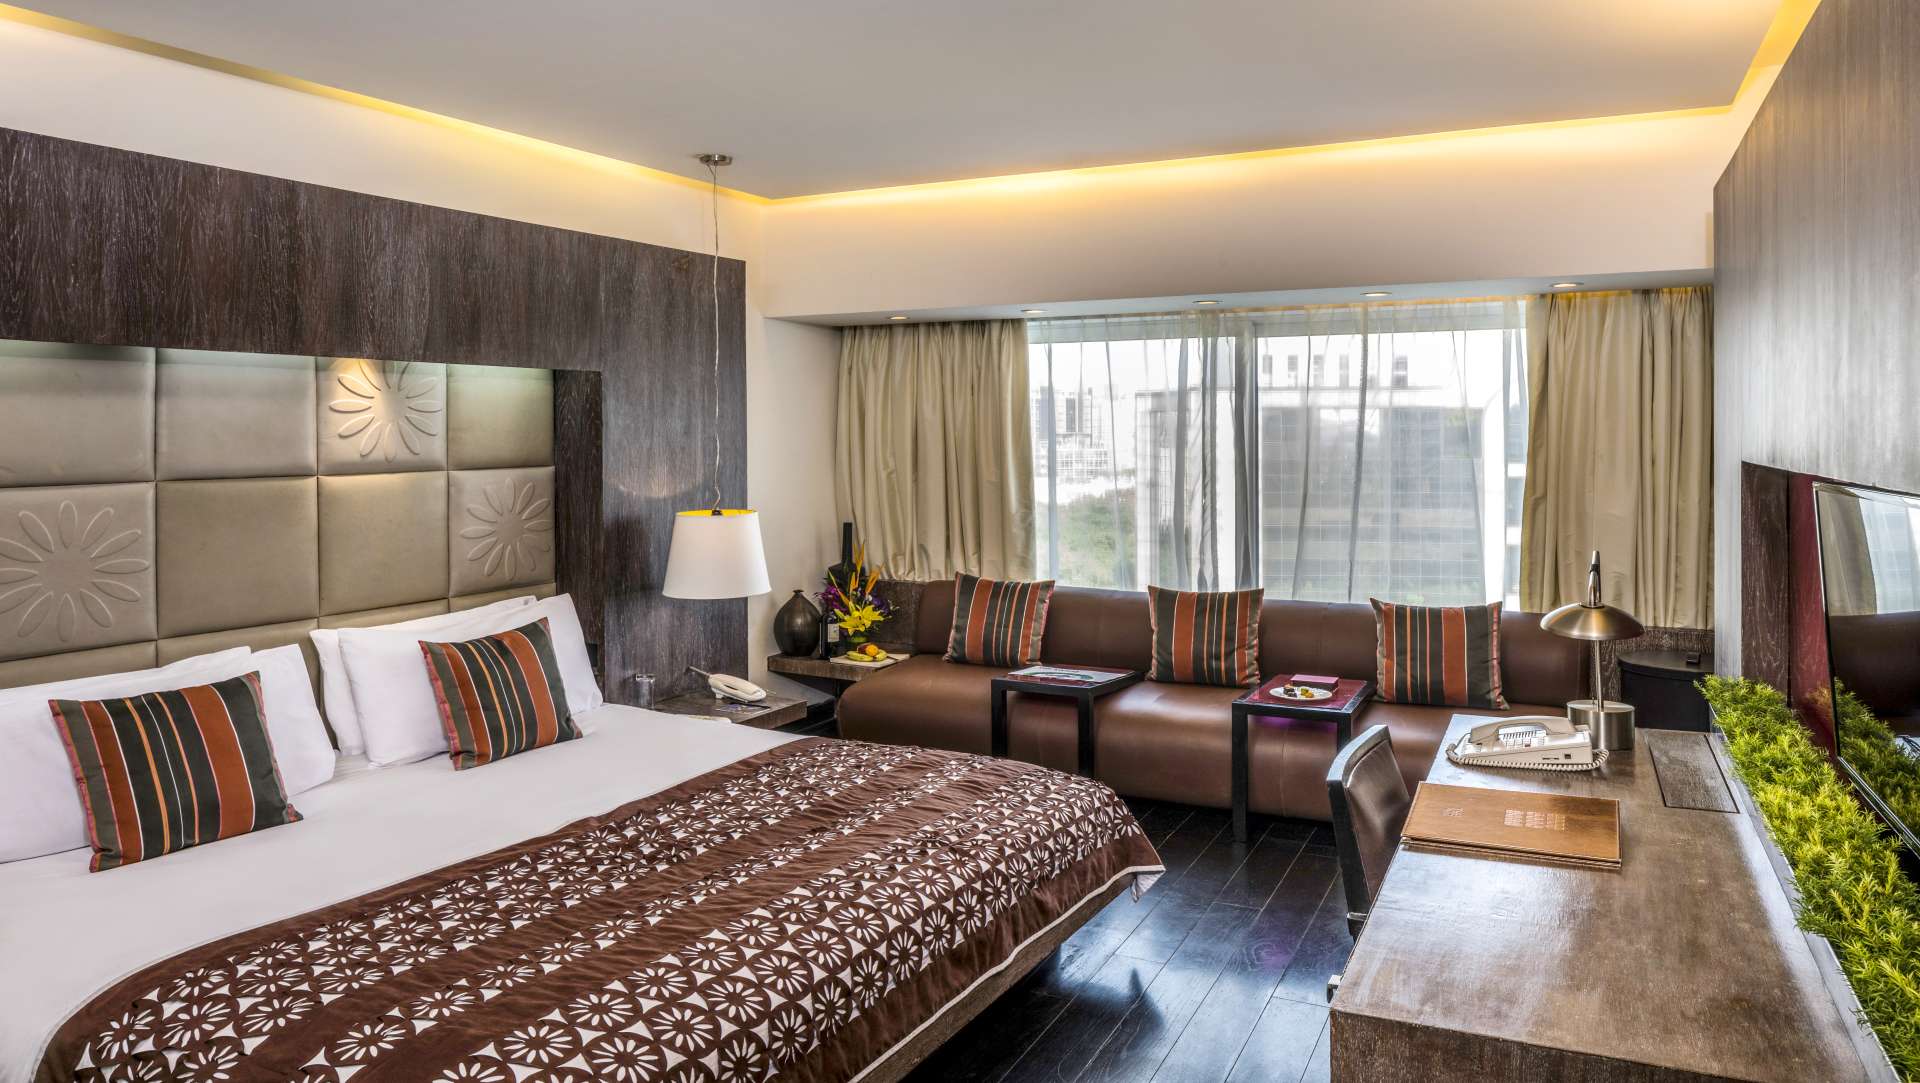 The Residence Rooms at The Park Hotels New Delhi